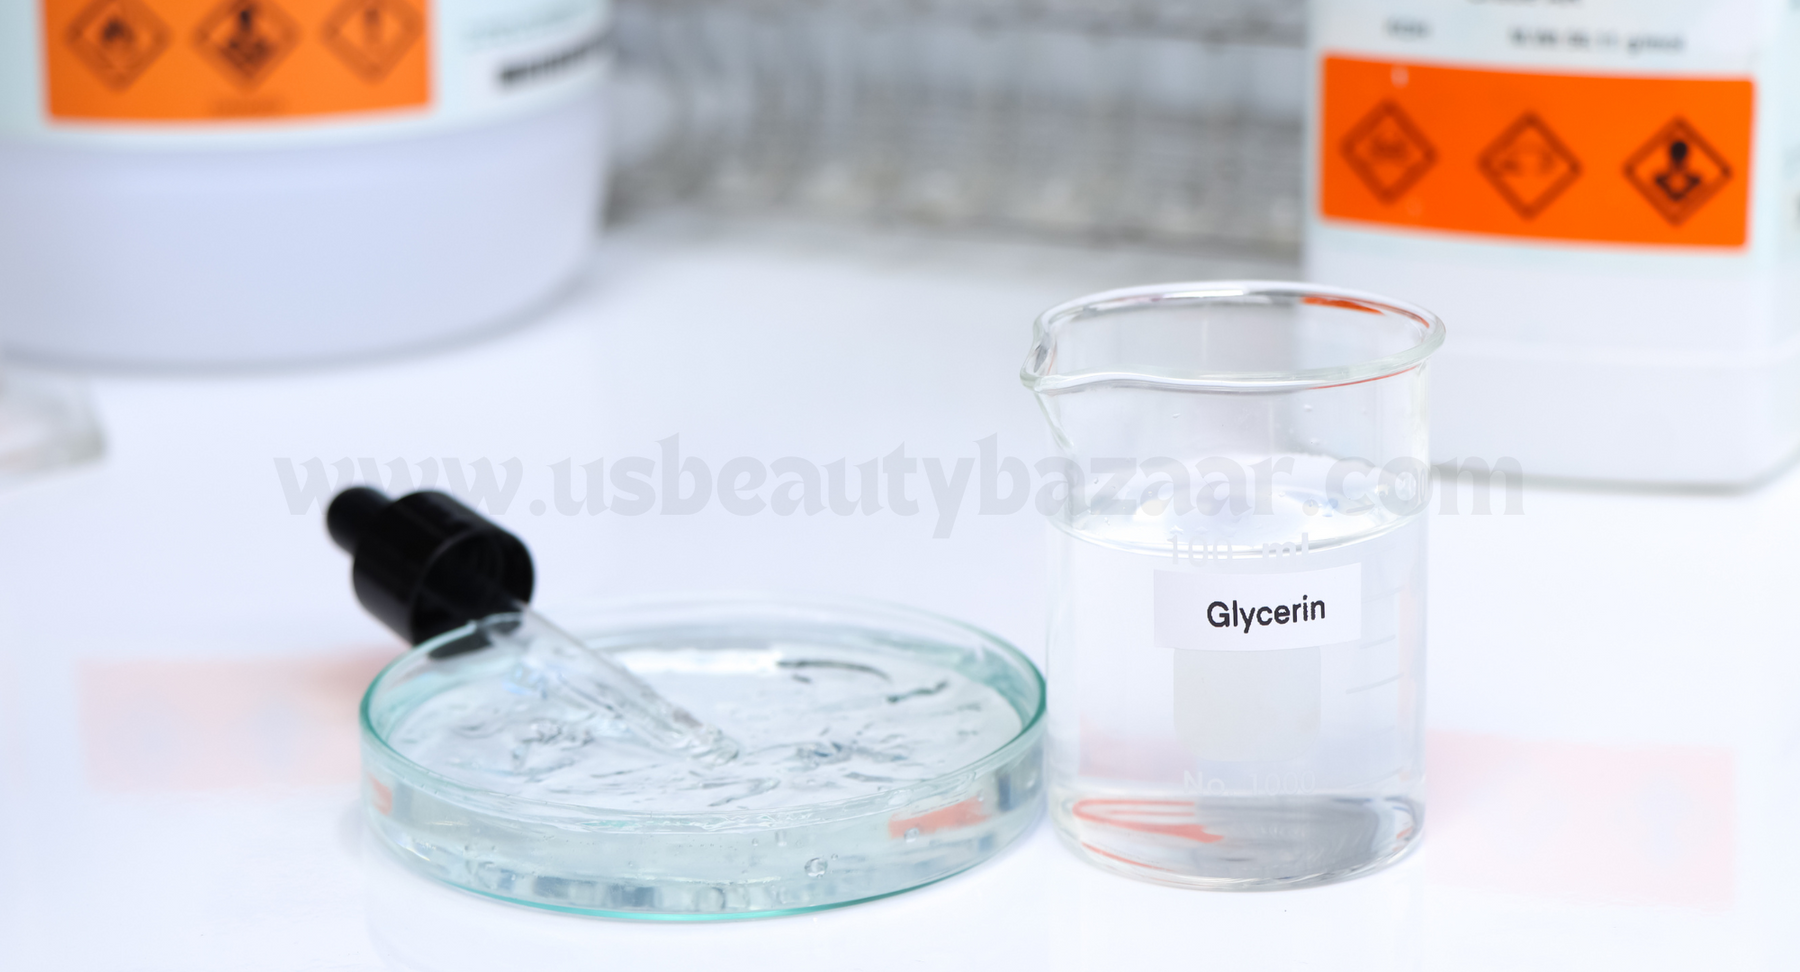 Glycerin: Is it Suitable for Oily or Acne-Prone Skin?